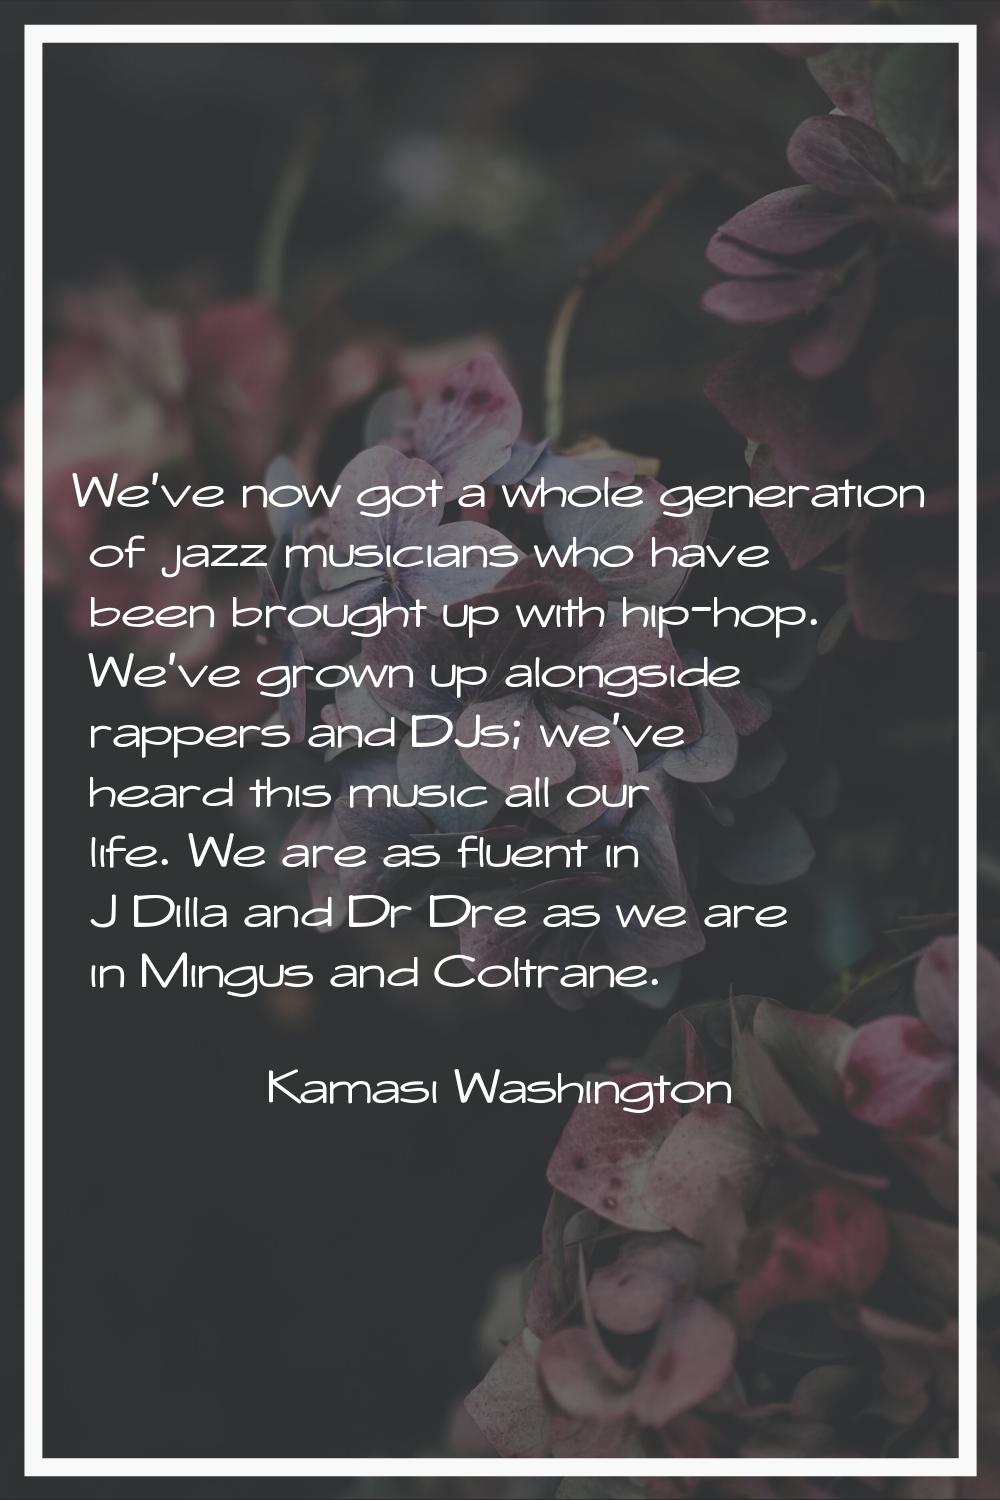 We've now got a whole generation of jazz musicians who have been brought up with hip-hop. We've gro